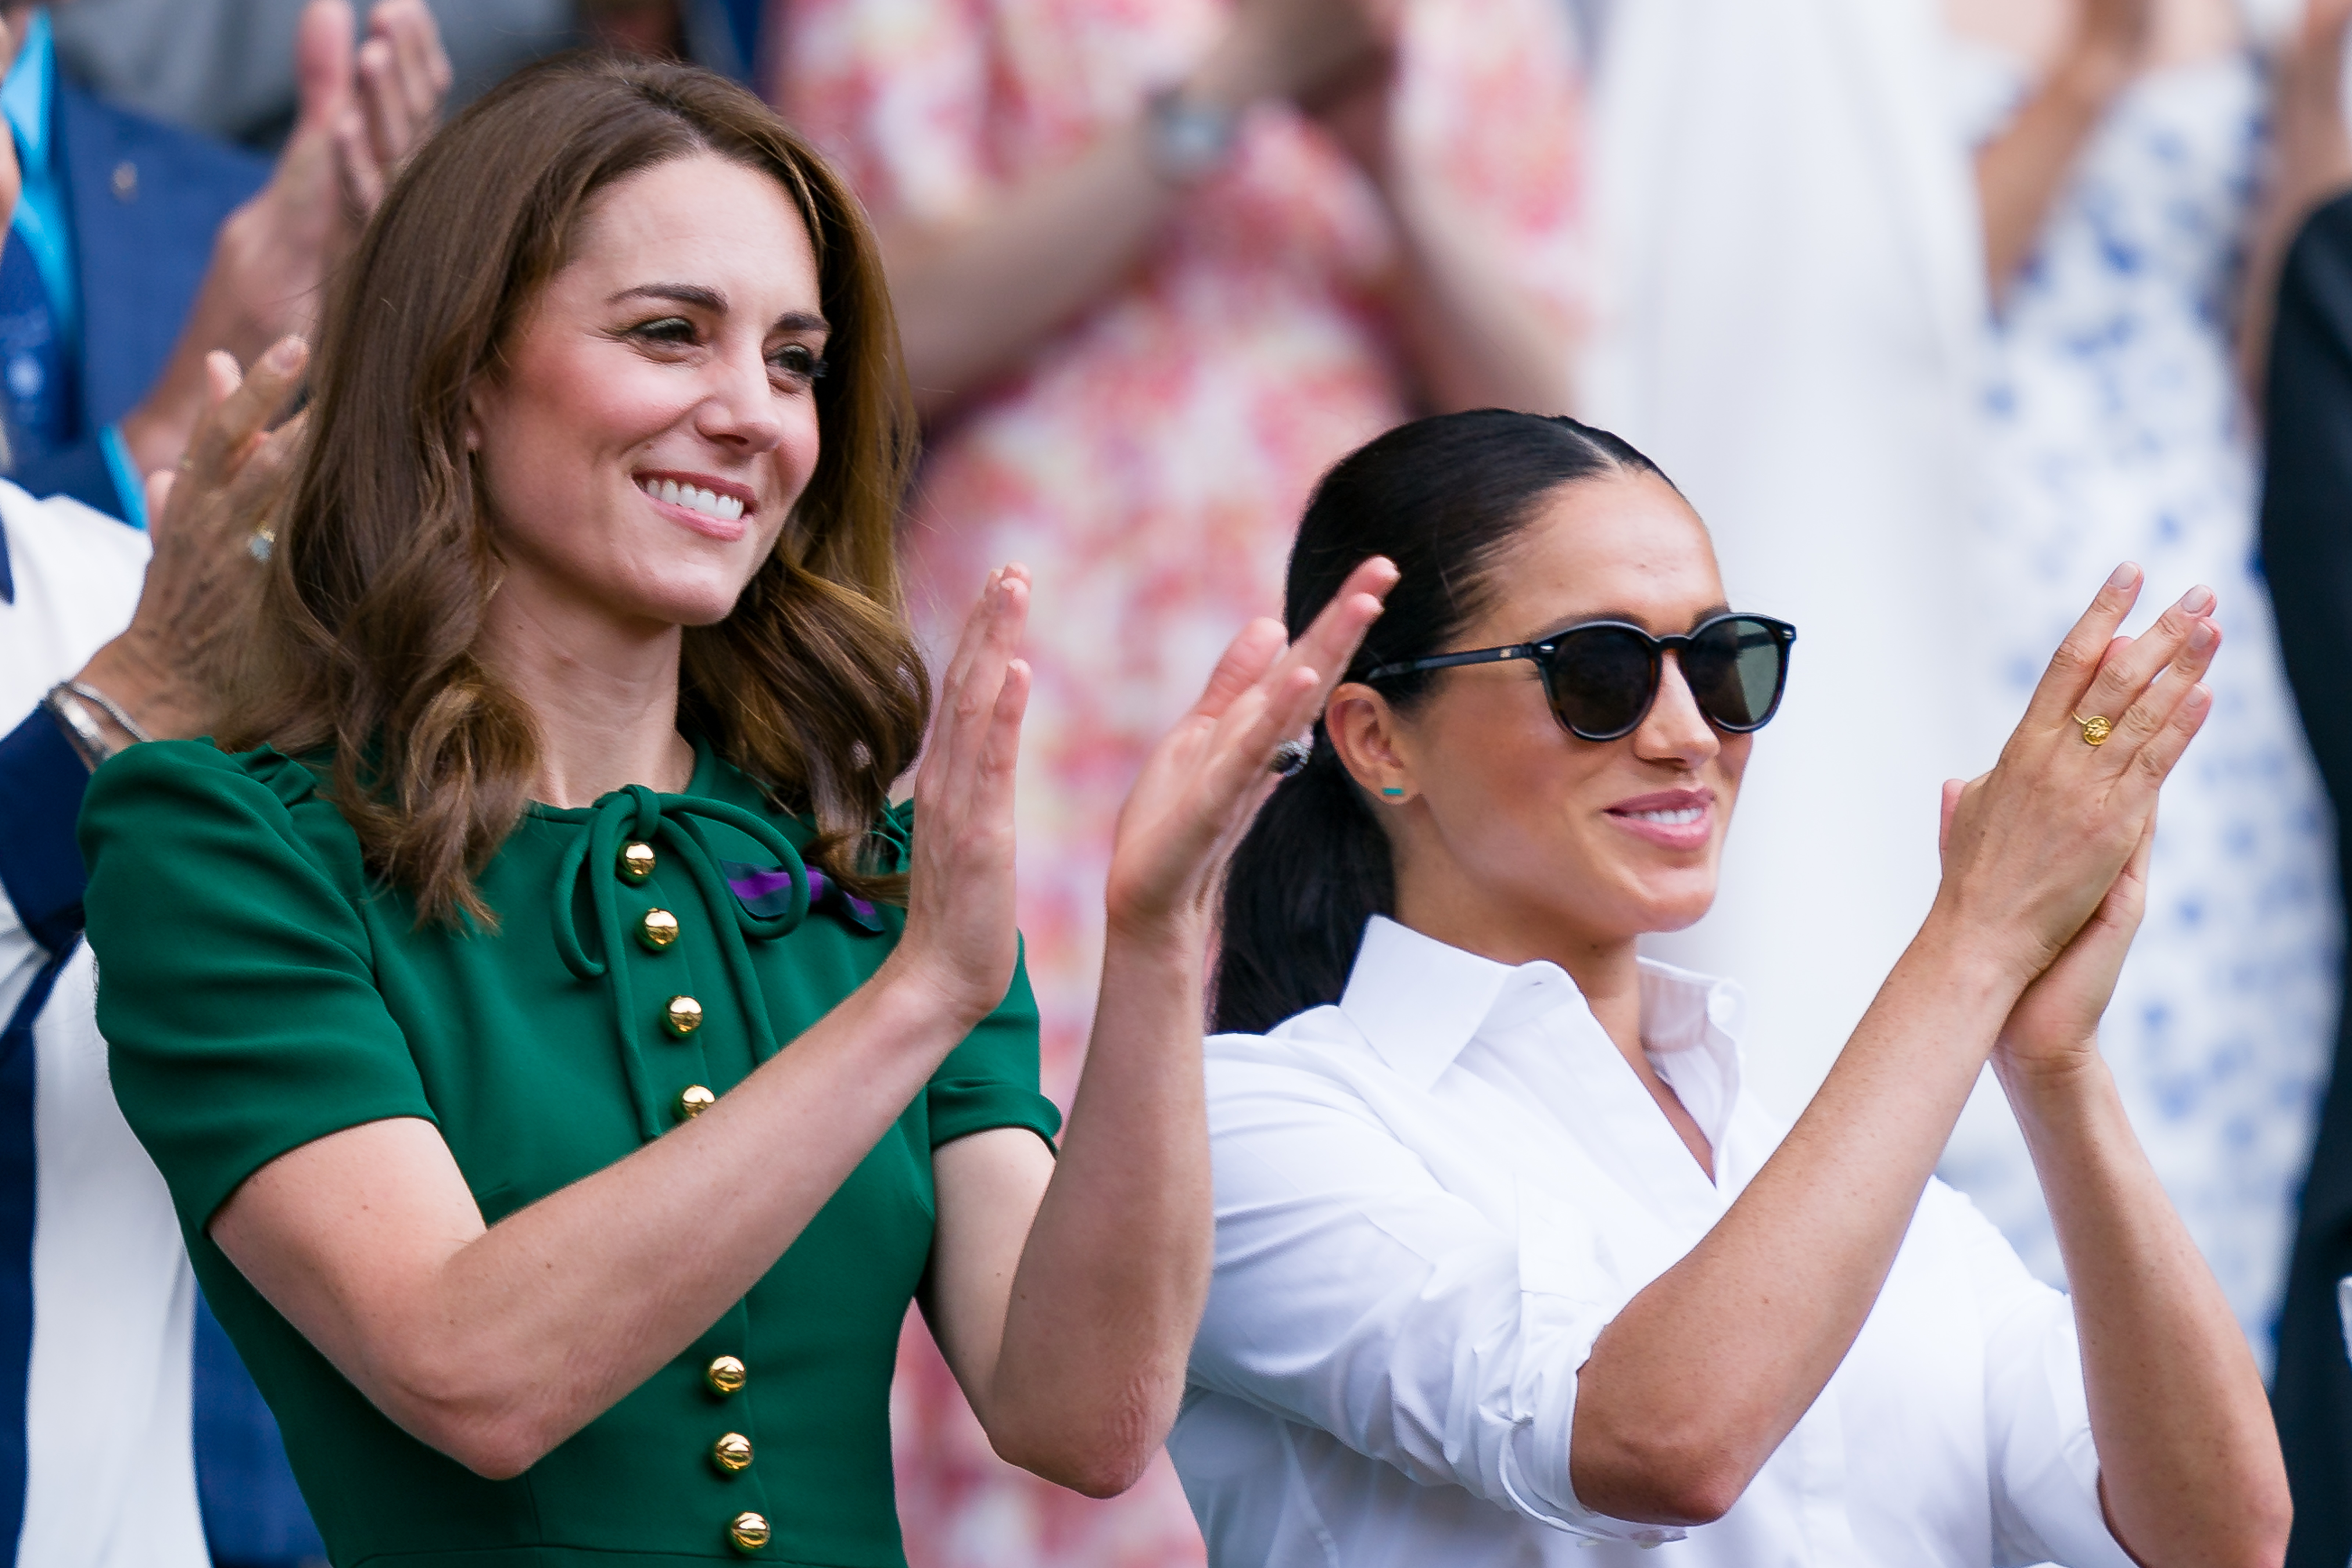 Princess Catherine and Meghan Markle at Wimbledon 2019 at All England Lawn Tennis and Croquet Club on July 13, 2019 in London, England | Source: Getty Images